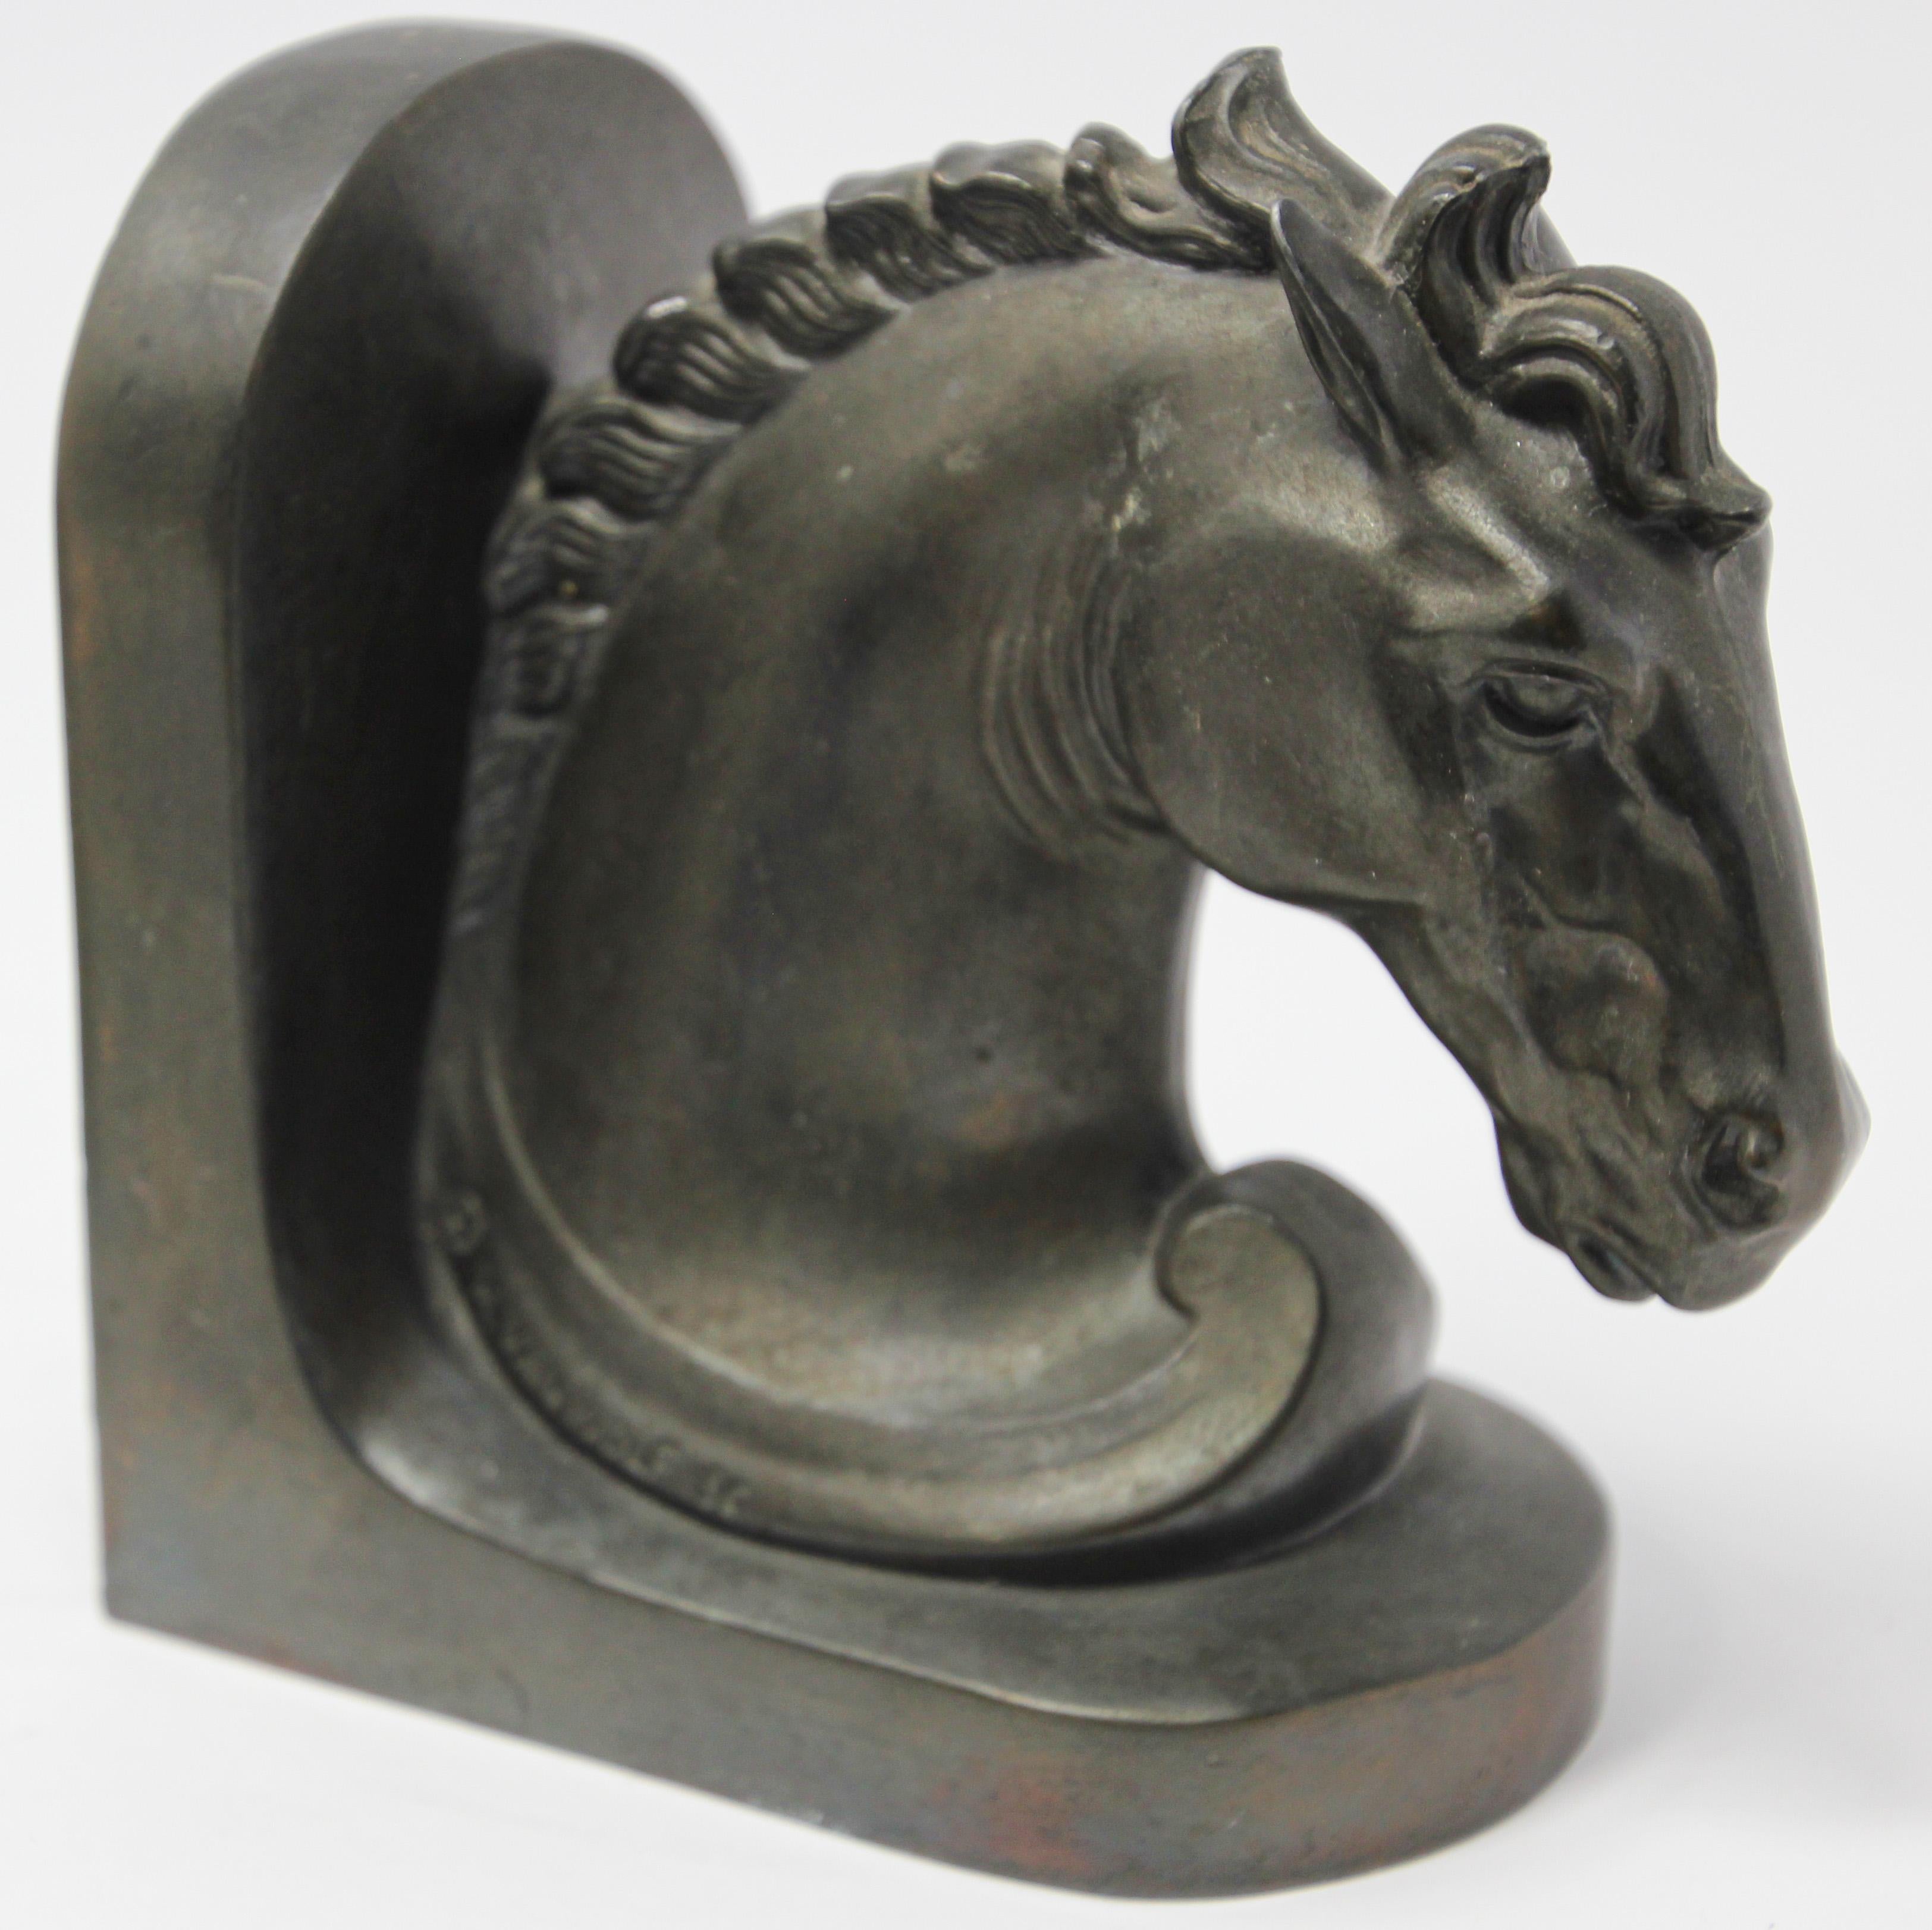 Art Deco Stylized Cast Bronze Sculptures of Horse Bust on Stand Bookends 10